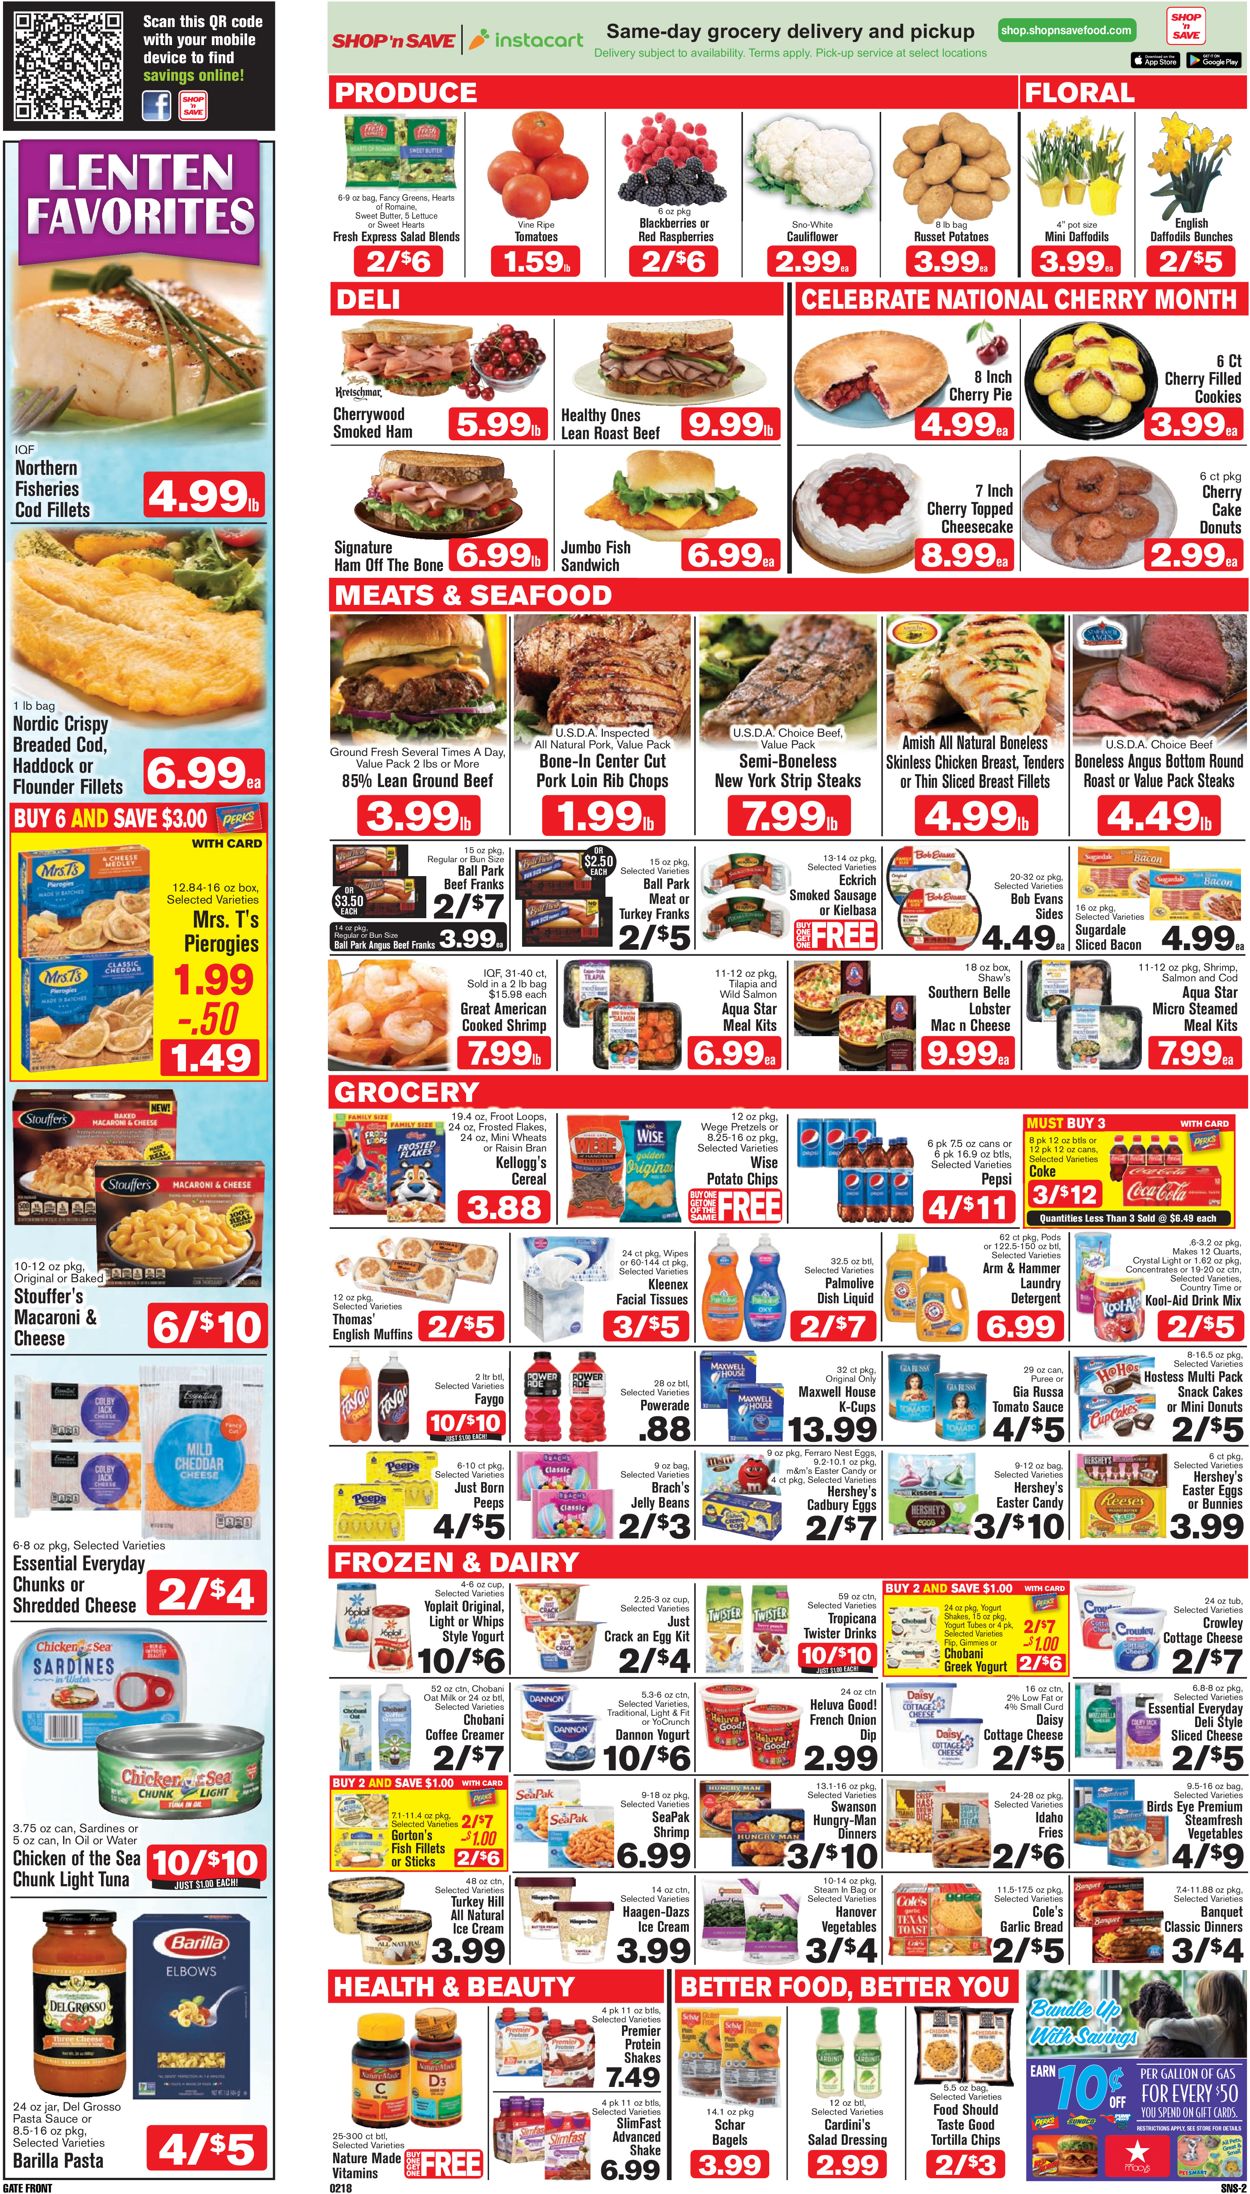 Shop ‘n Save (Pittsburgh) Ad from 02/18/2021